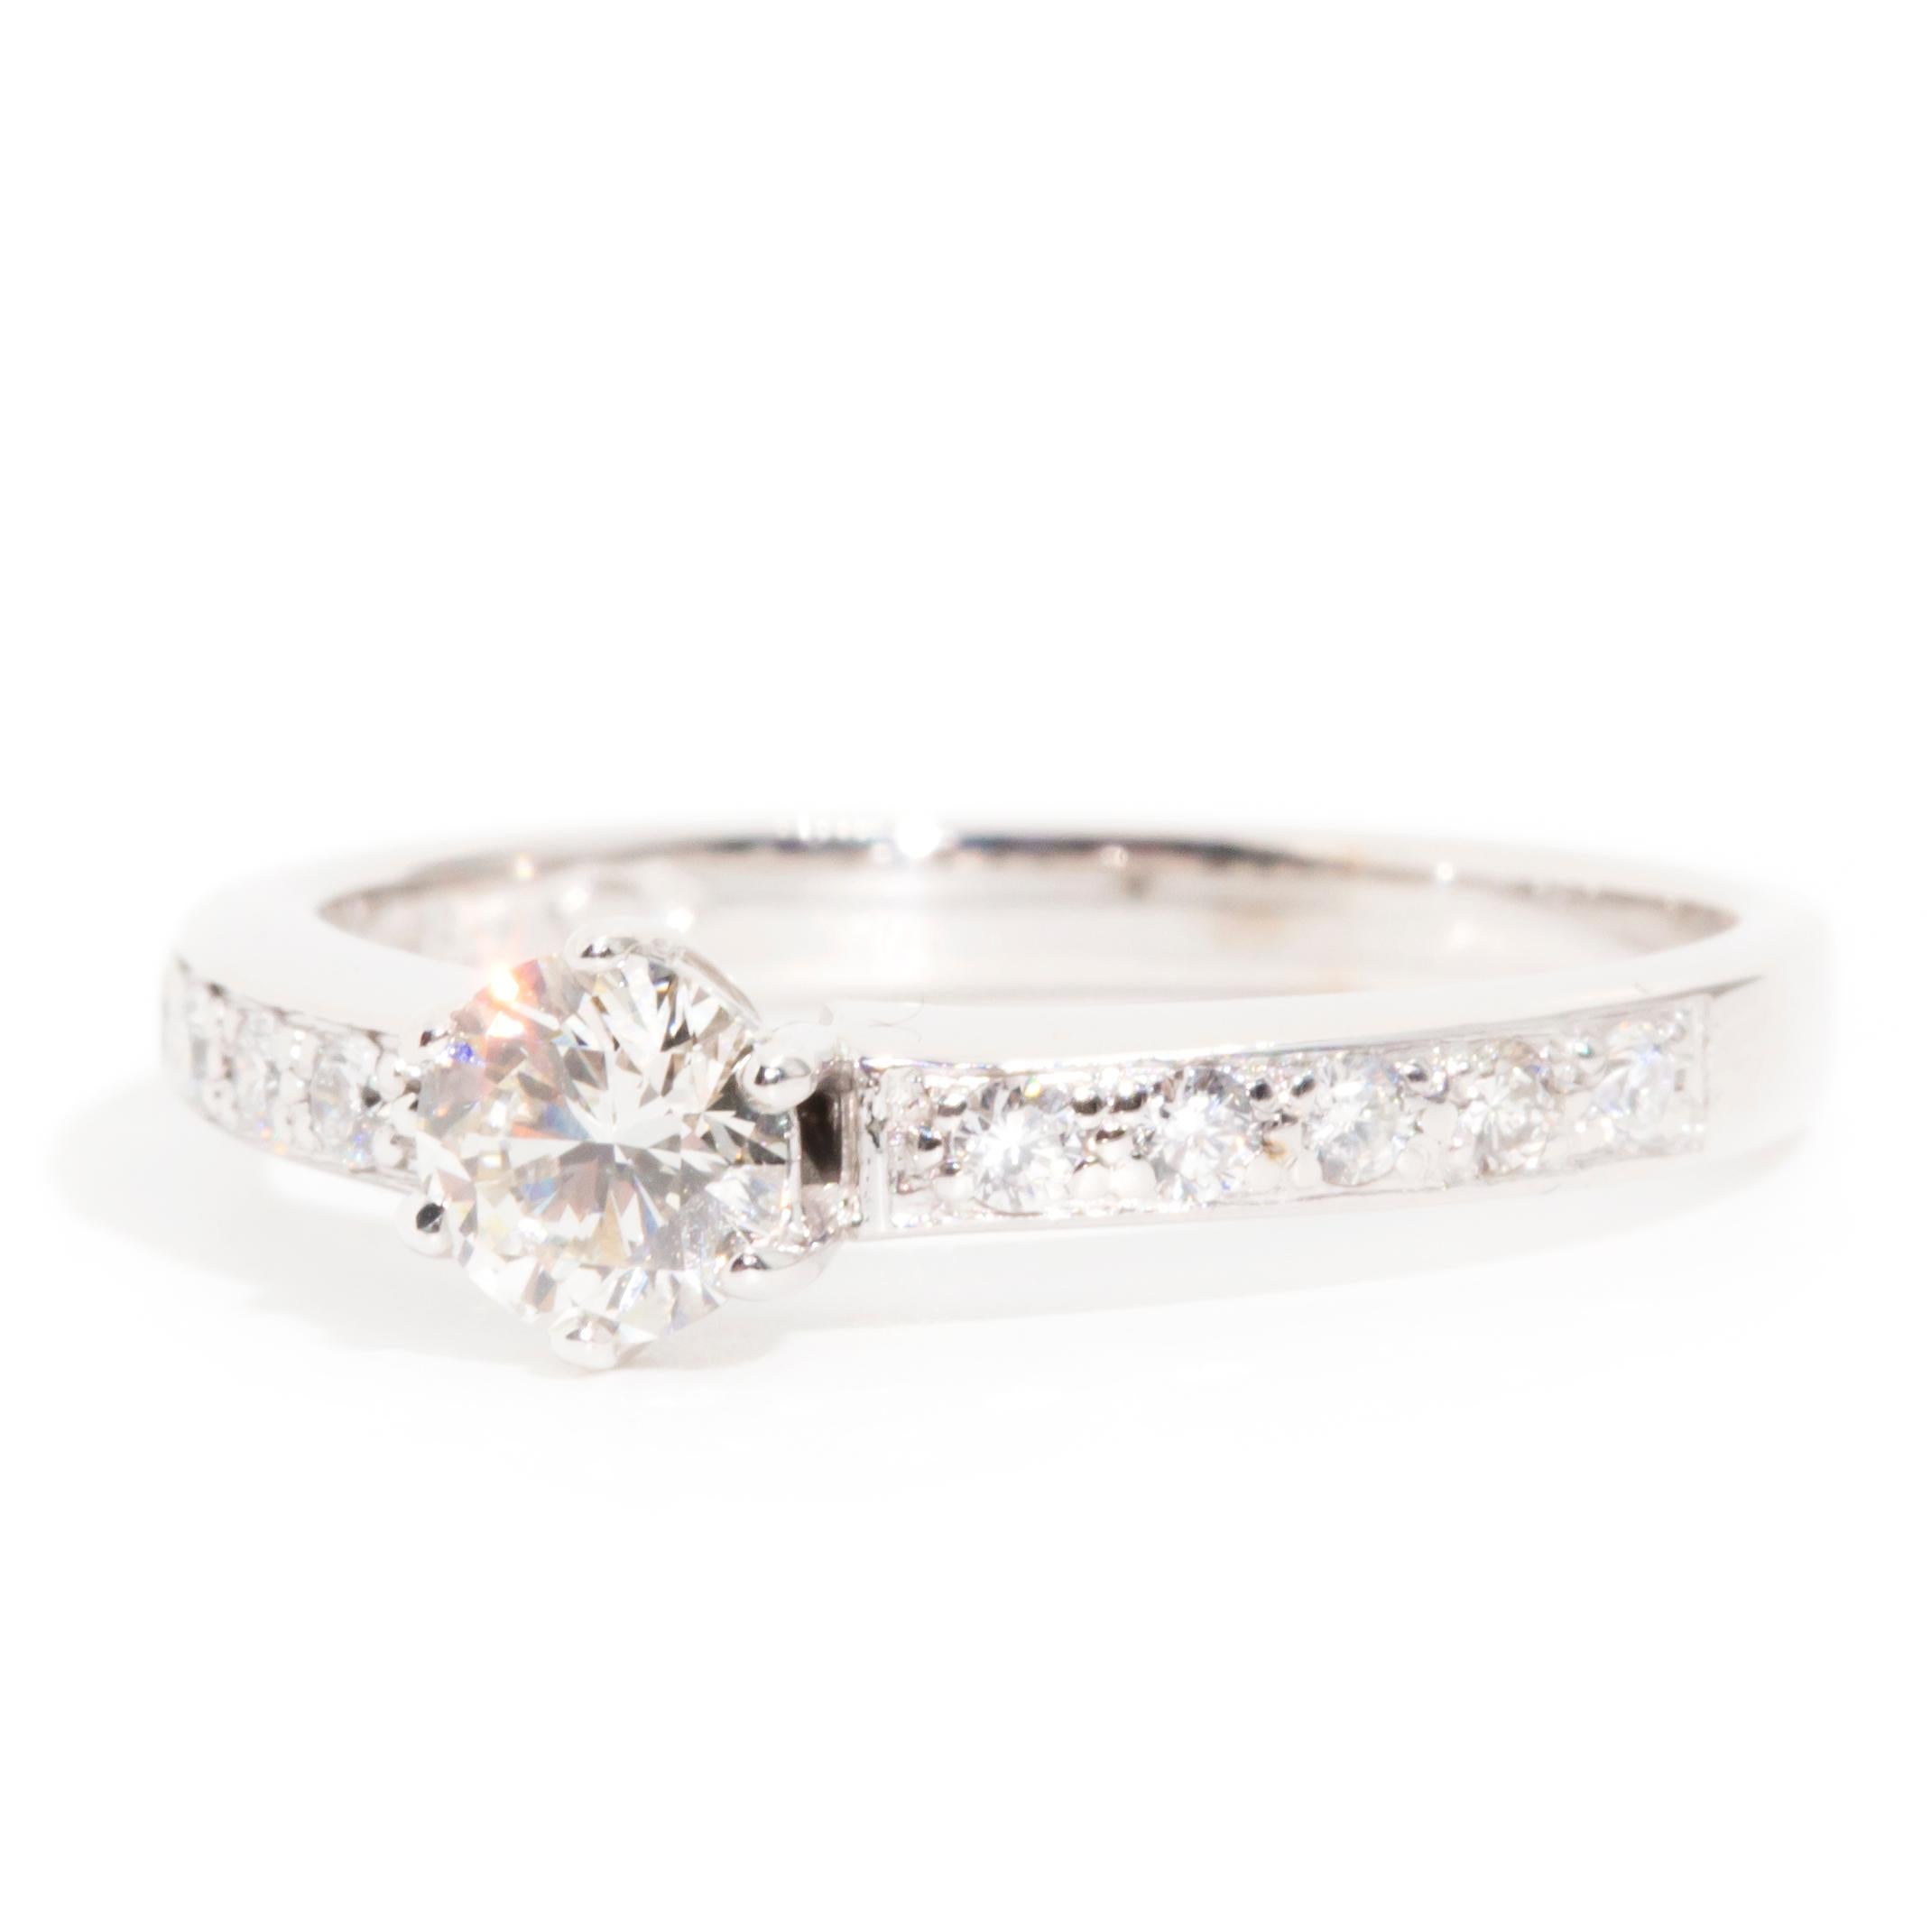 Lovingly forged in 18 carat white gold, this opulent vintage engagement ring features an impressive 0.45 carat round brilliant cut diamond raised up from an elegant band in a six claw setting, flanked by glittering rows of round brilliant diamonds.